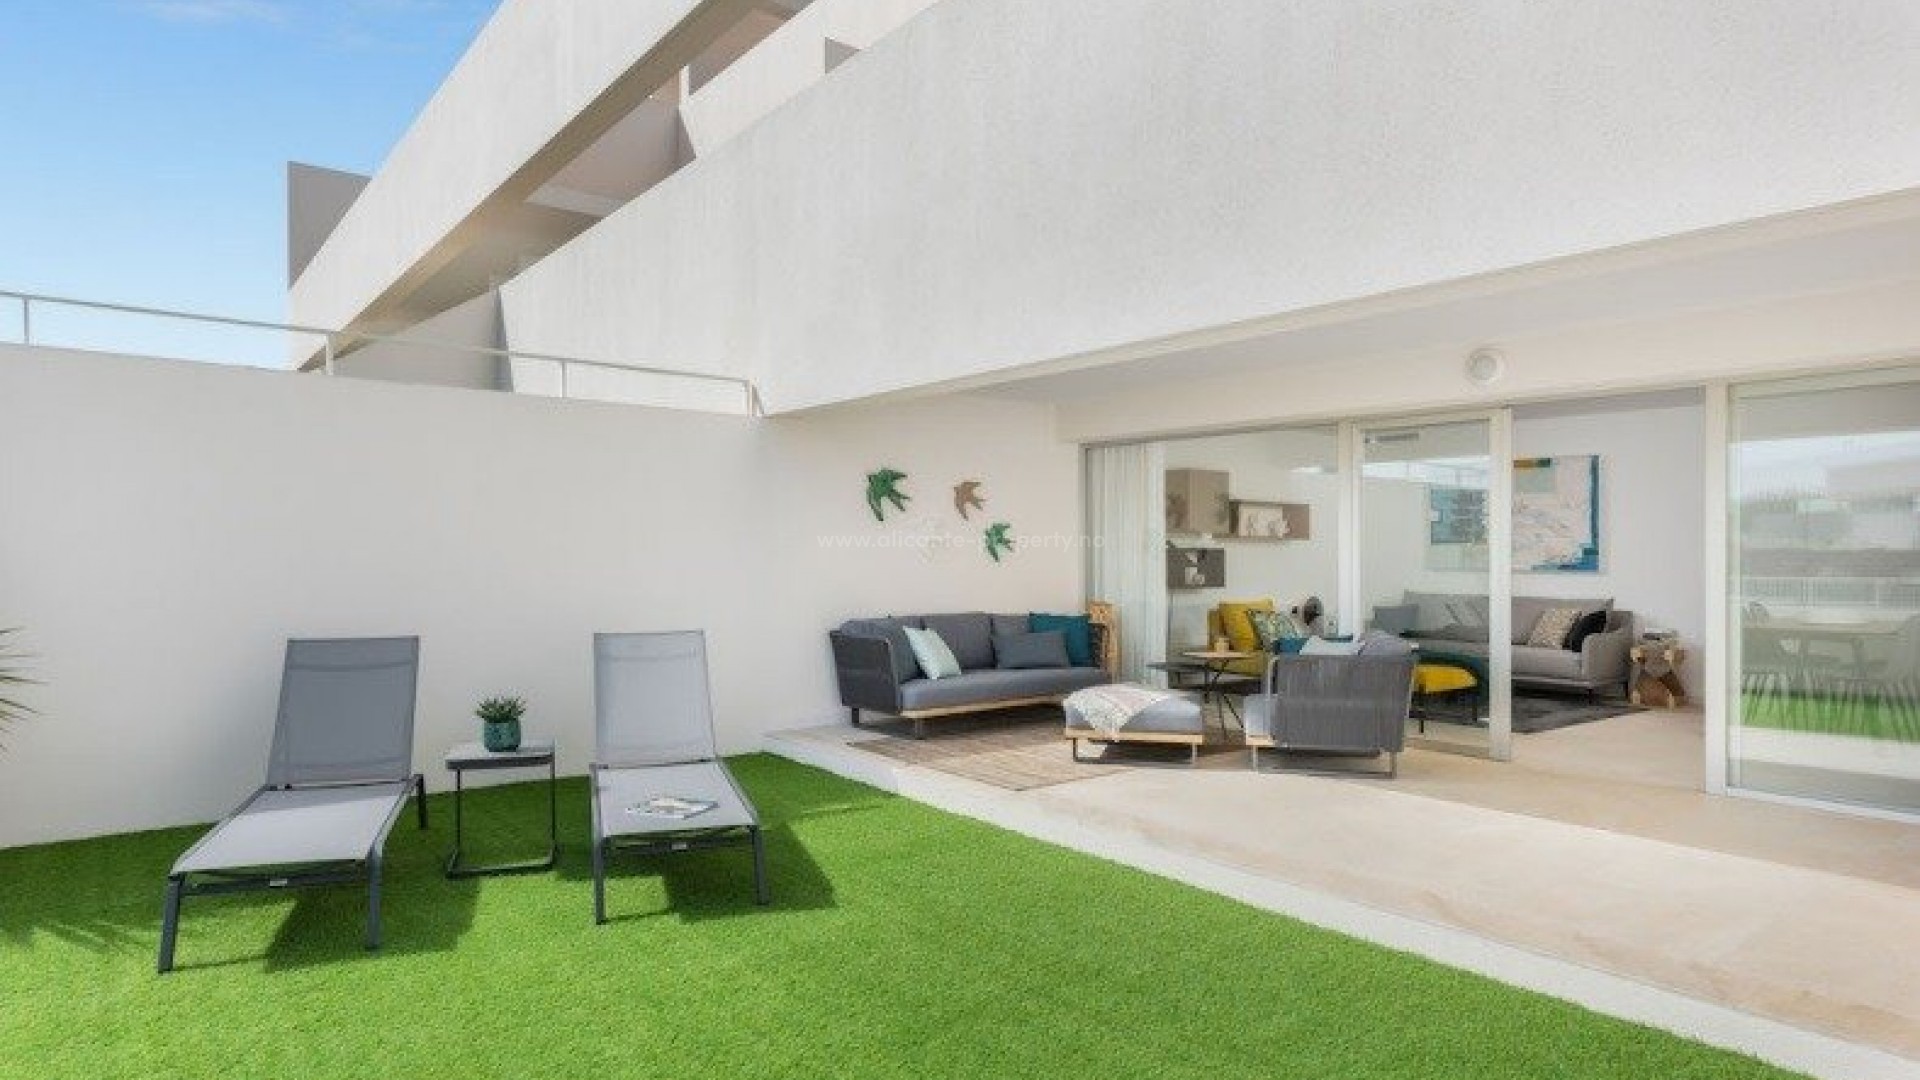 New residential building of bungalows in Los Balcones, Torrevieja, Alicante, 2/3 bedrooms. The common areas are equipped with a fantastic 200 m2 infinity pool